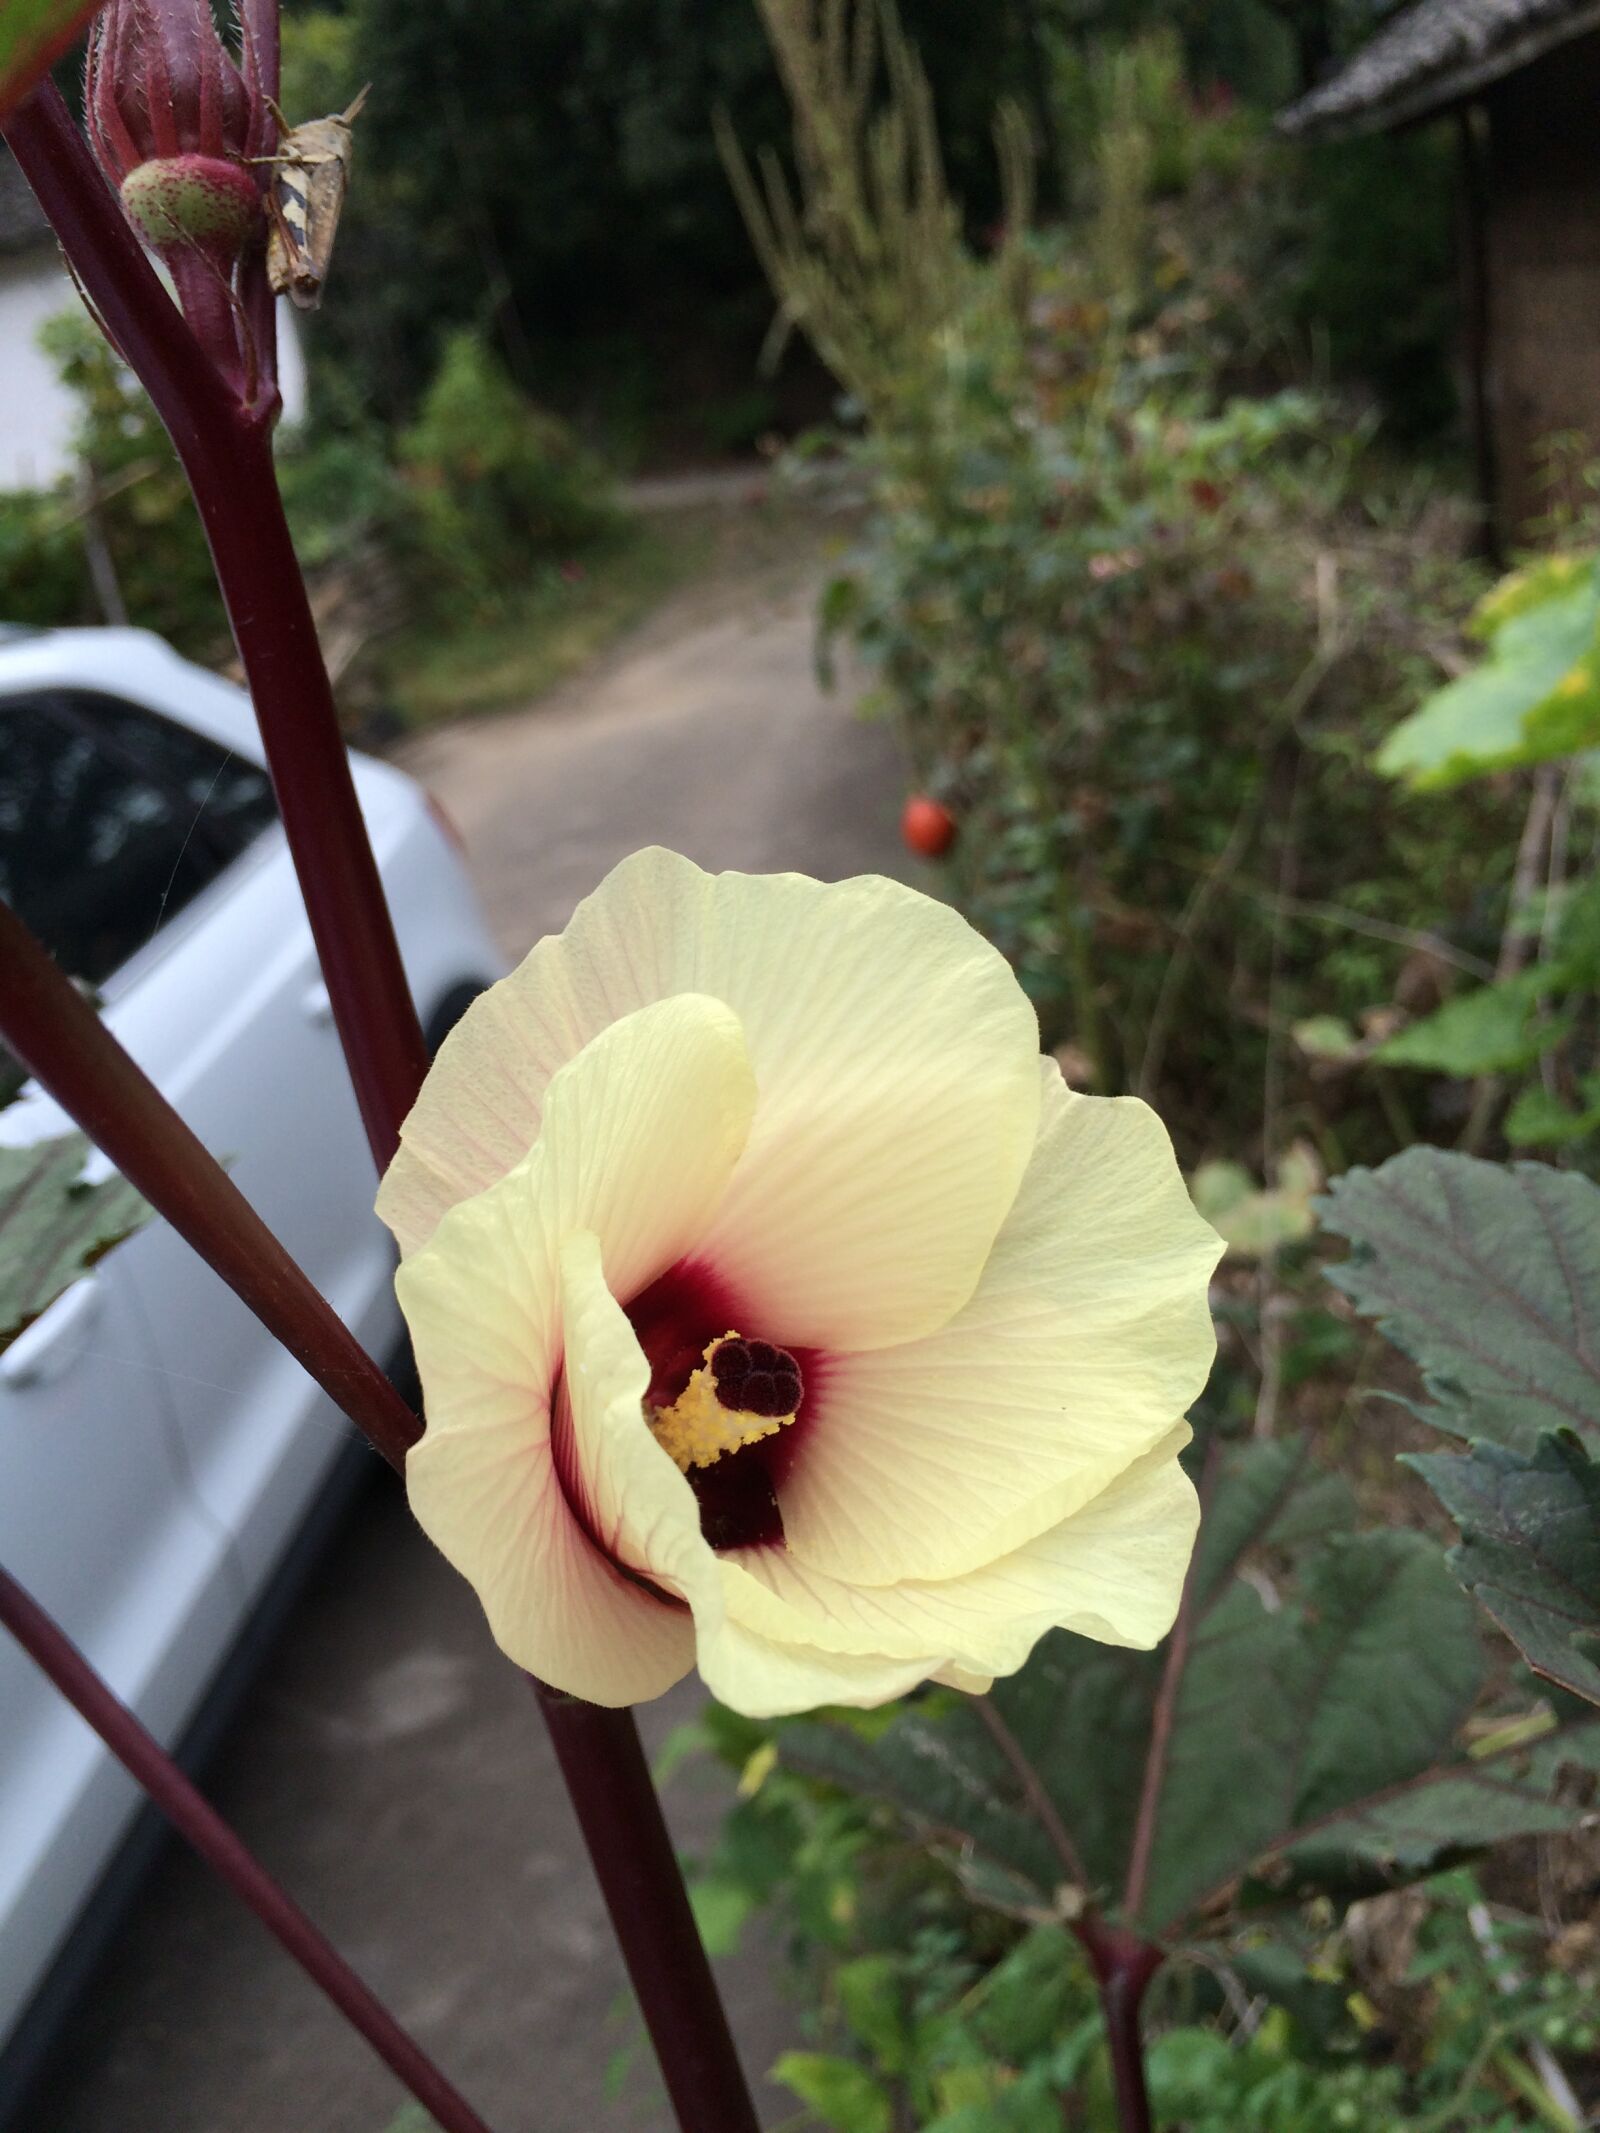 Apple iPhone 5s sample photo. Flower, car, lord photography